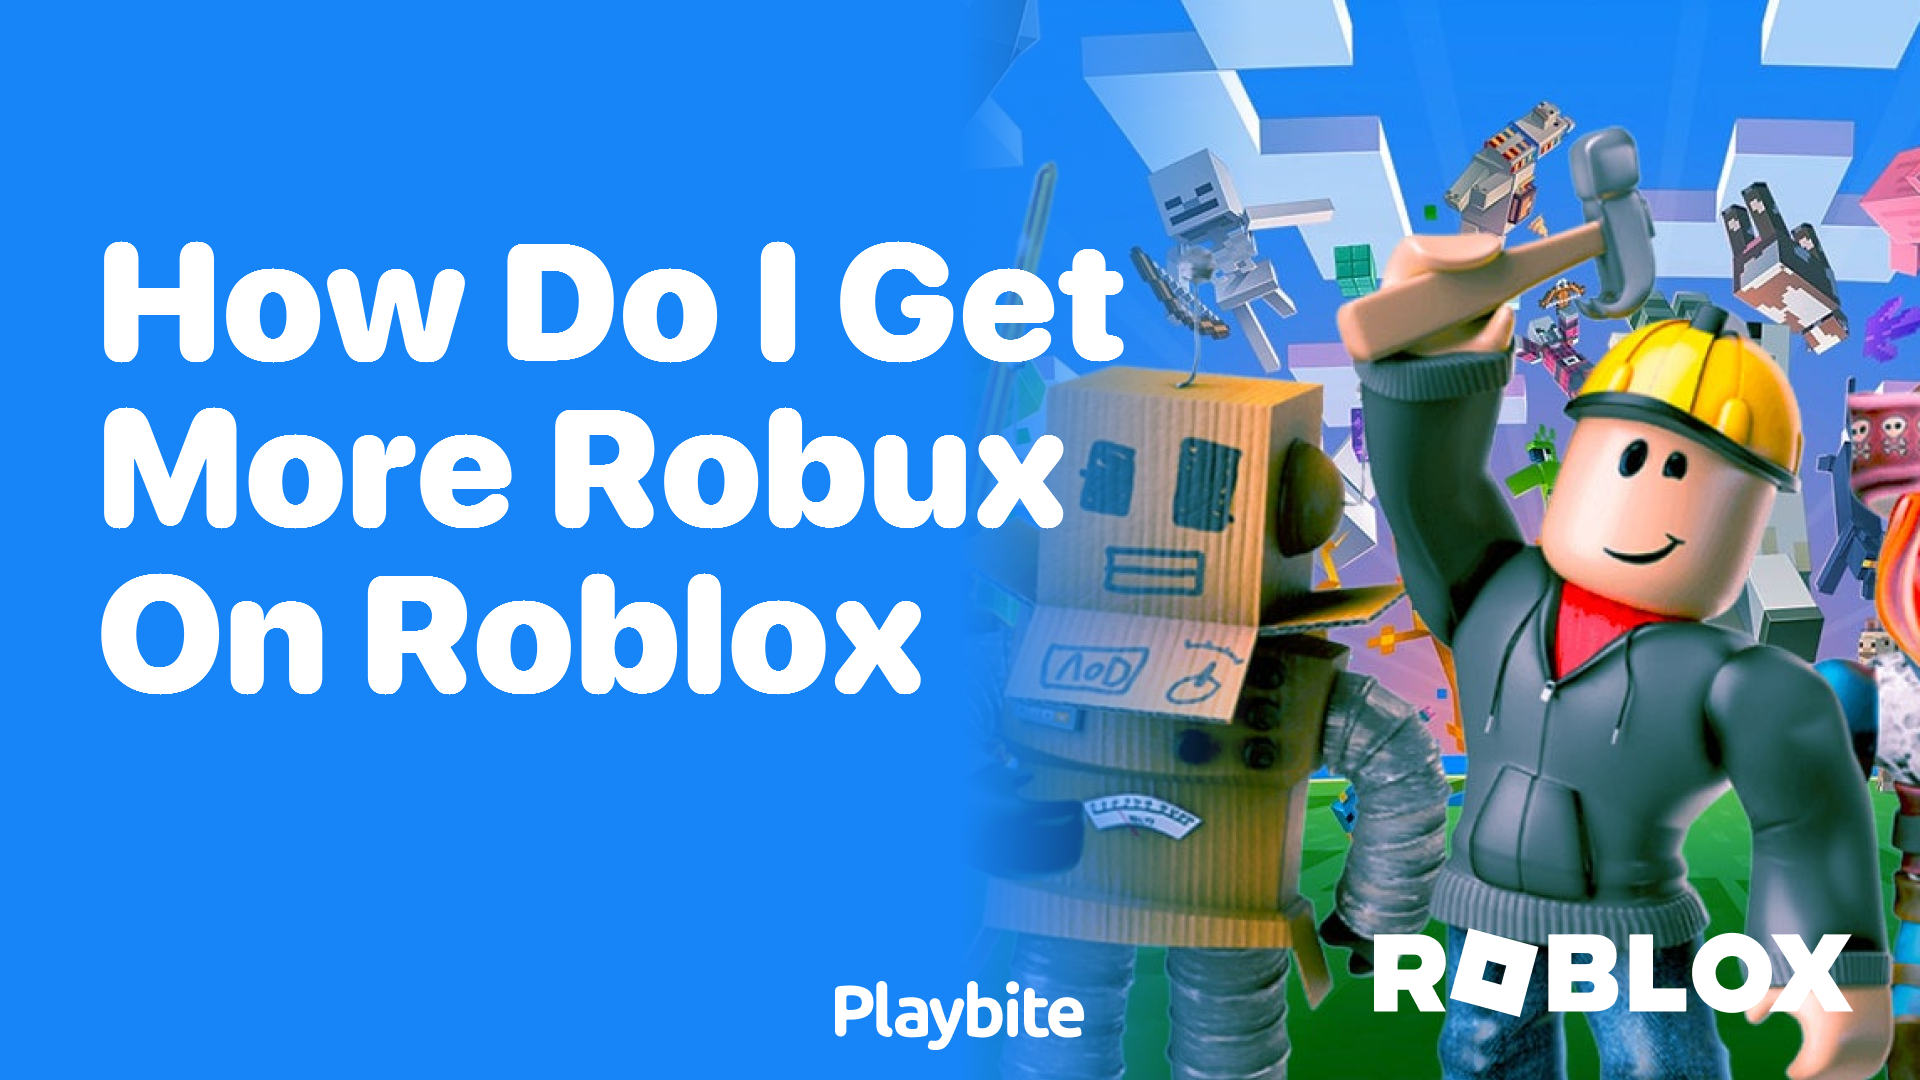 How Do I Get More Robux on Roblox?